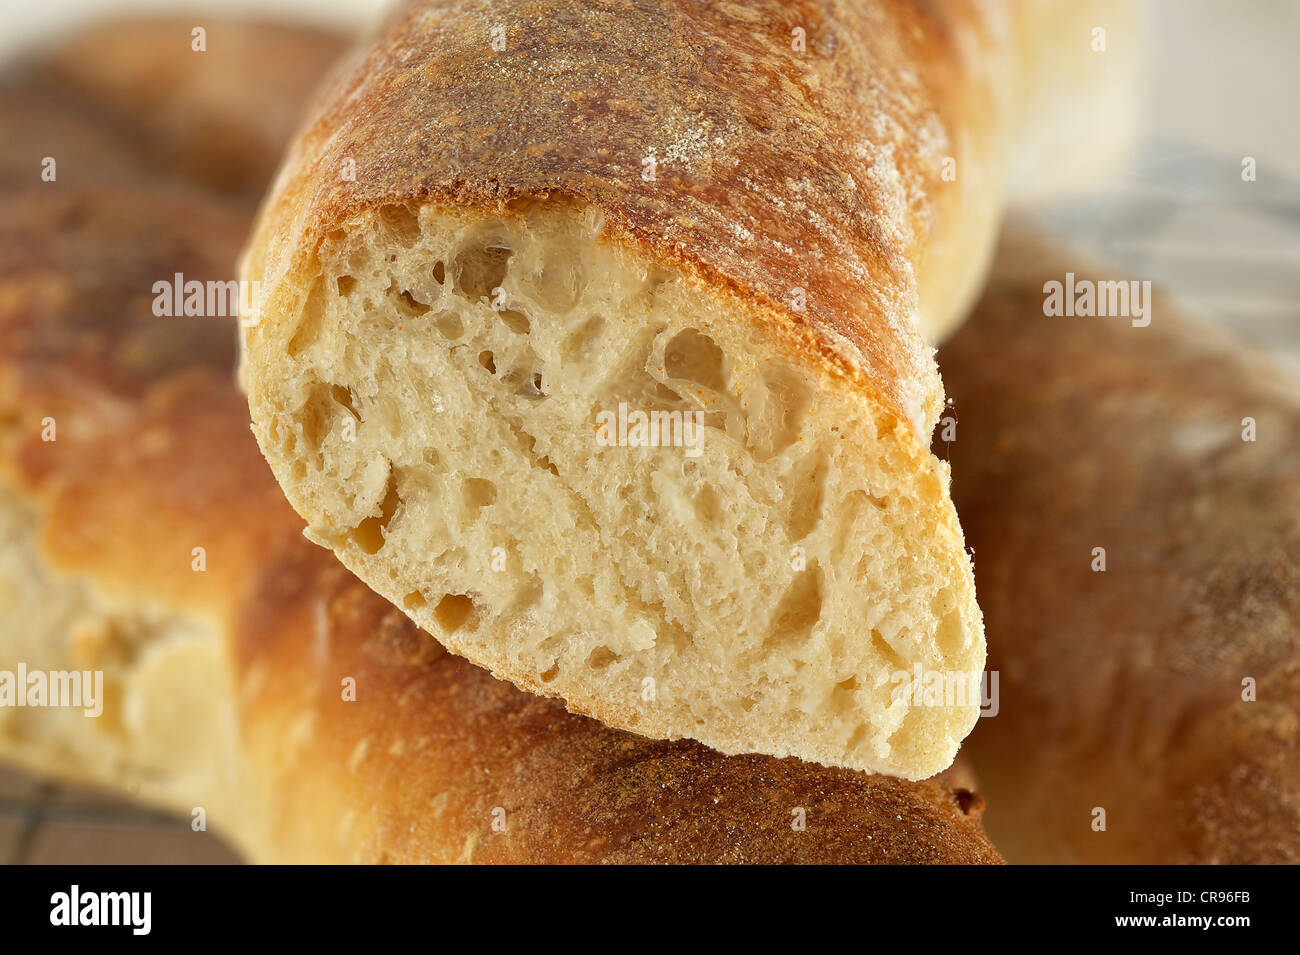 Home-baked baguettes Stock Photo